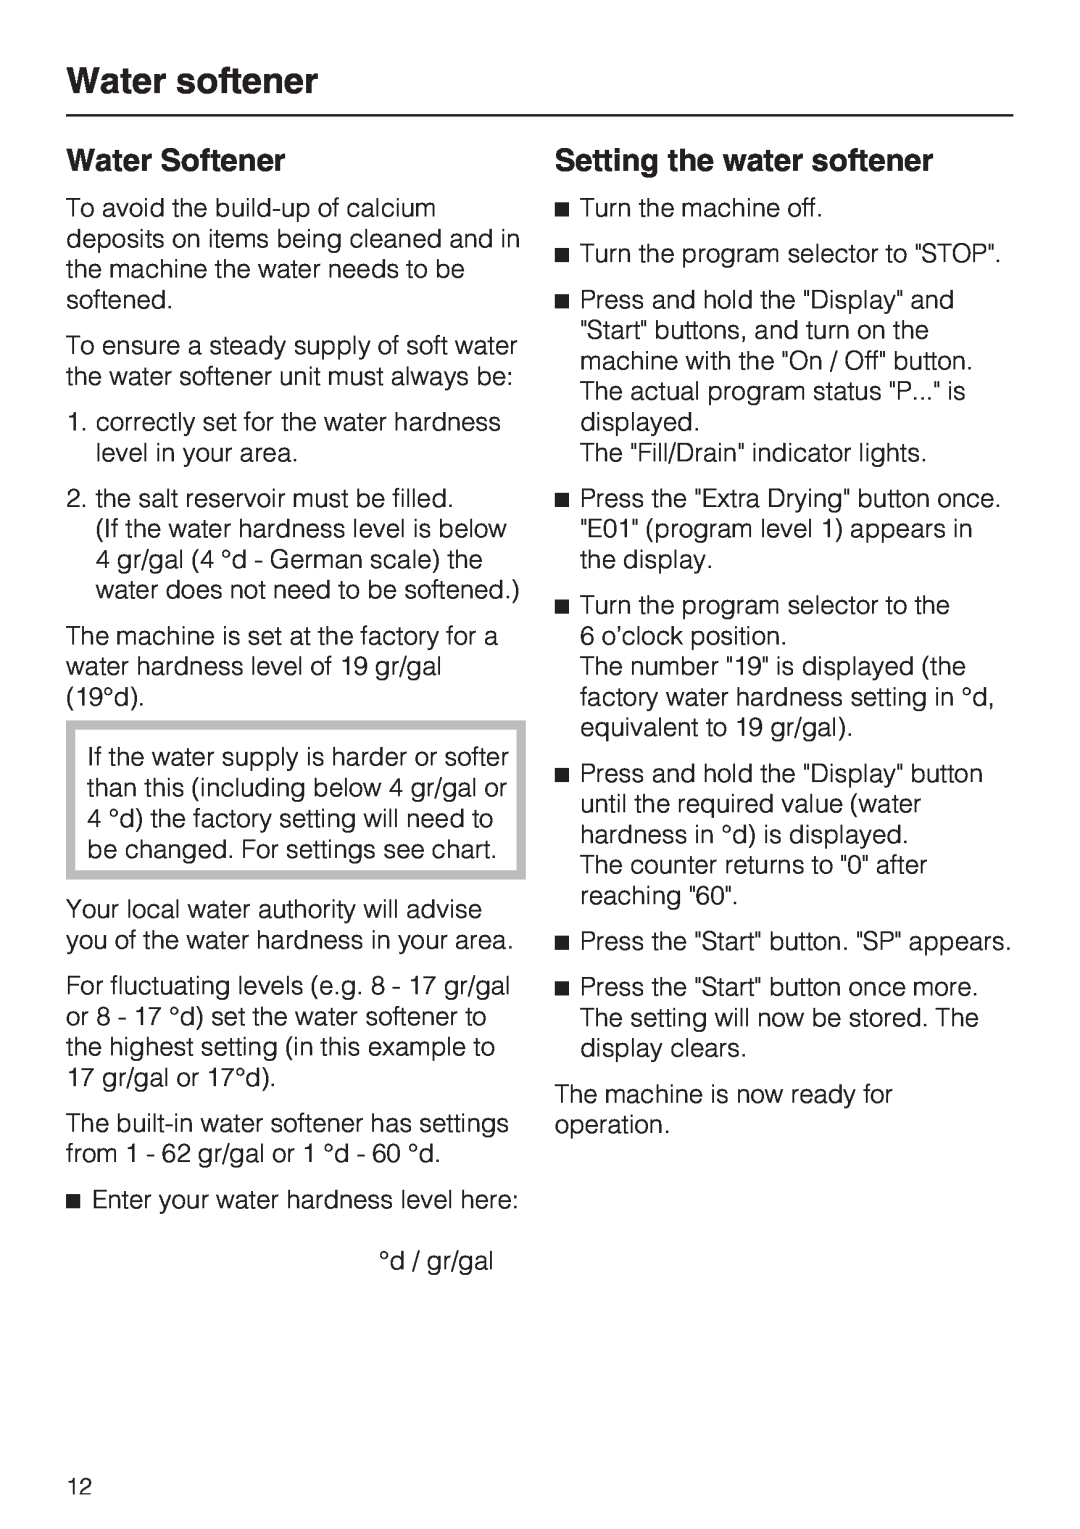 Miele G 7856, 06 868 521 installation instructions Water softener, Water Softener, Setting the water softener 